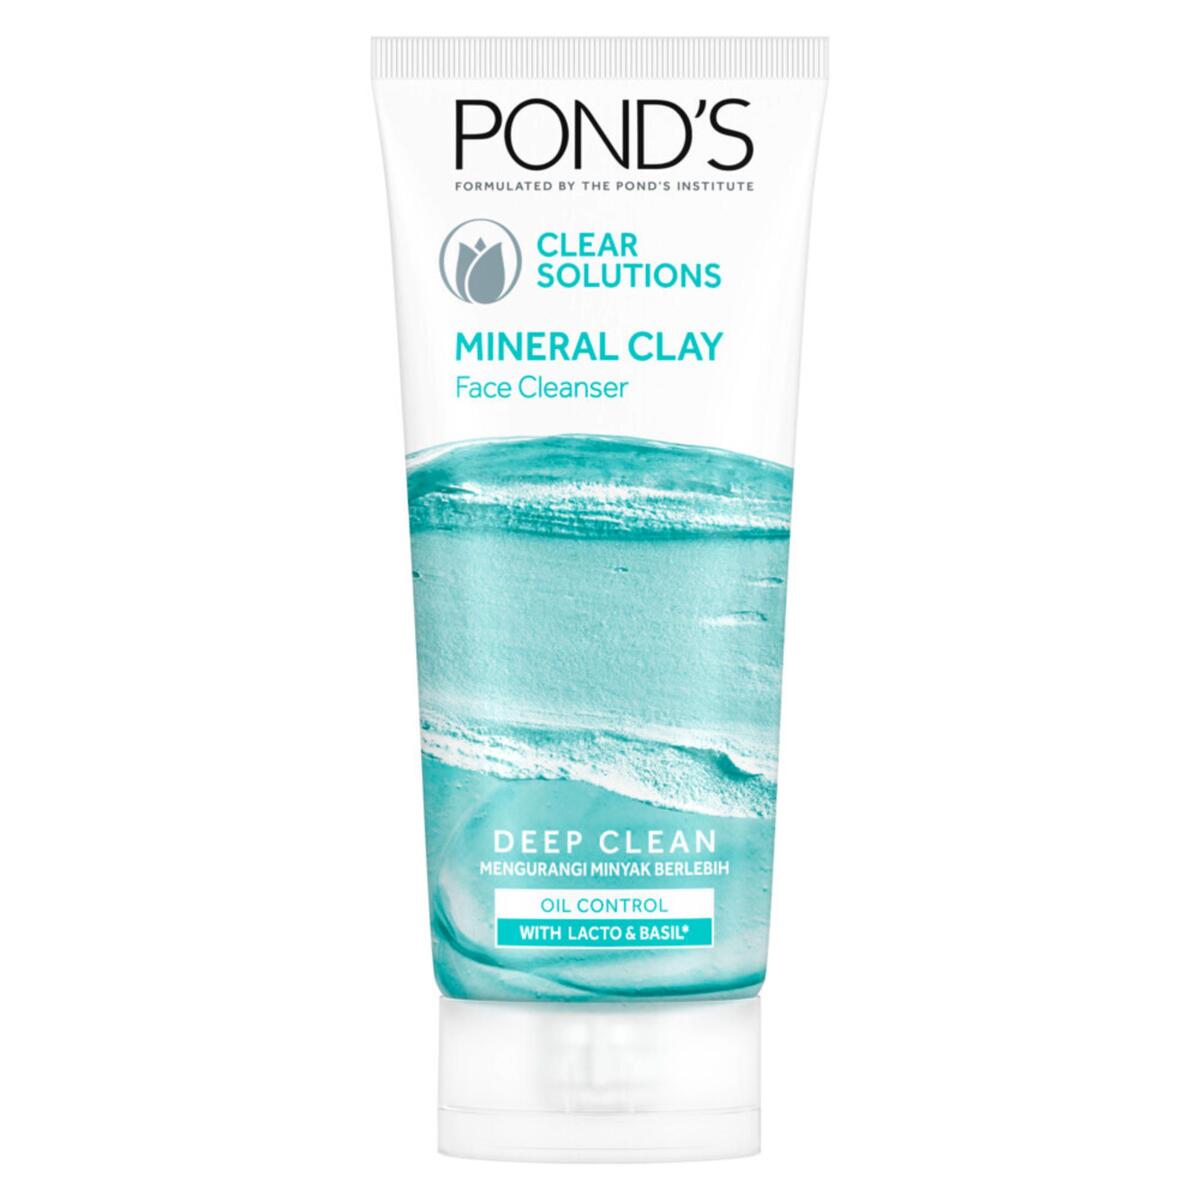 Ponds Clear Solutions Mineral Clay Face Cleanser, 90 g